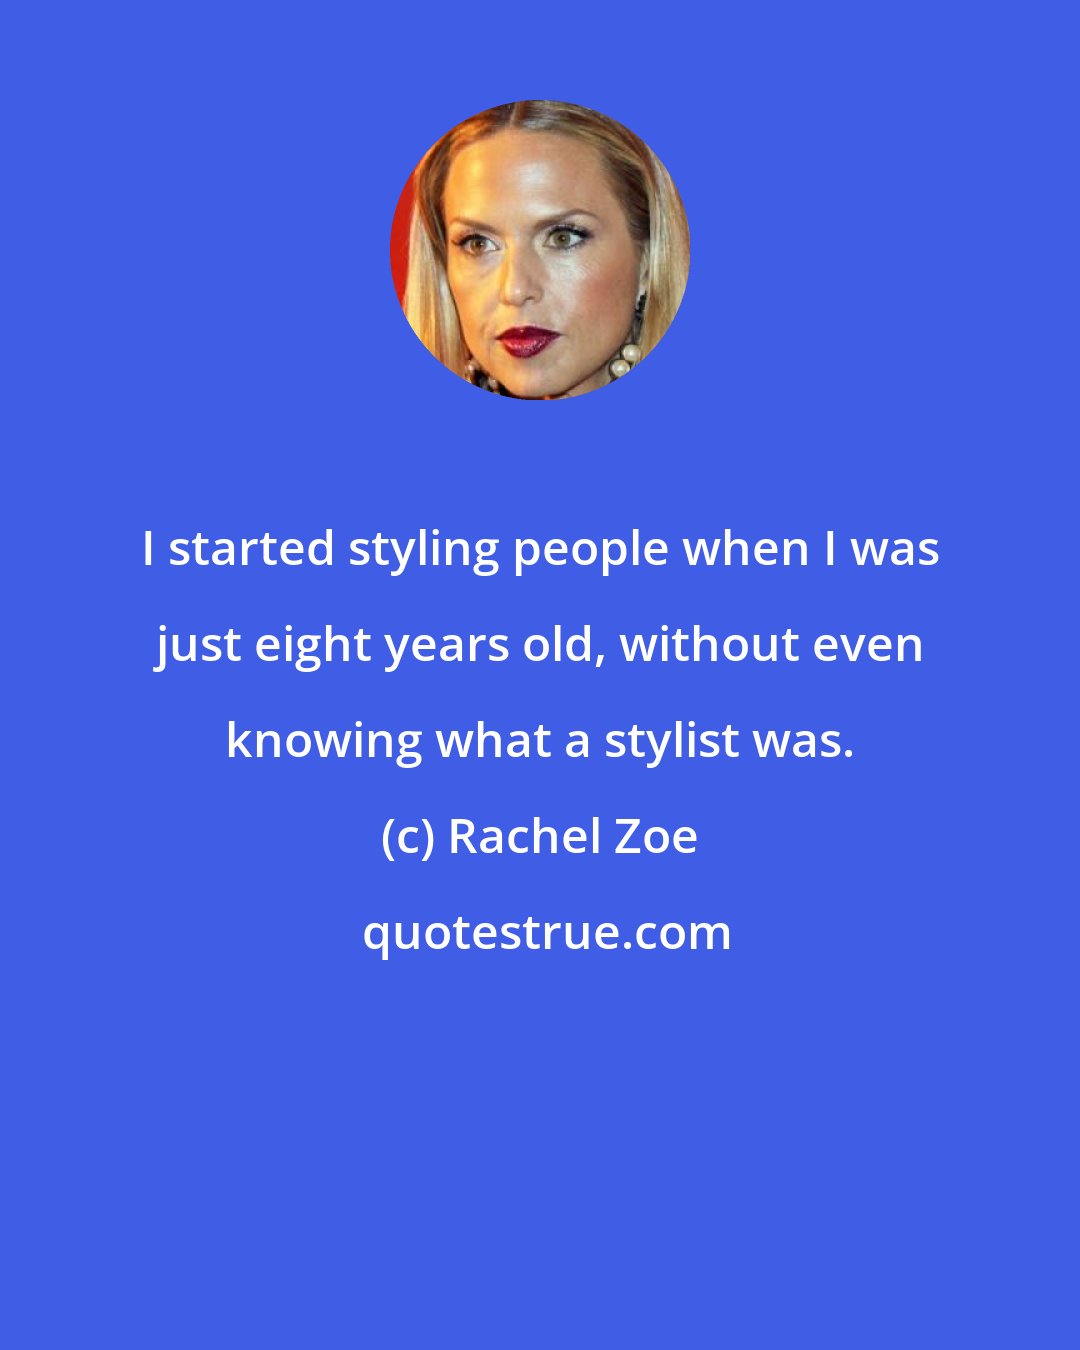 Rachel Zoe: I started styling people when I was just eight years old, without even knowing what a stylist was.